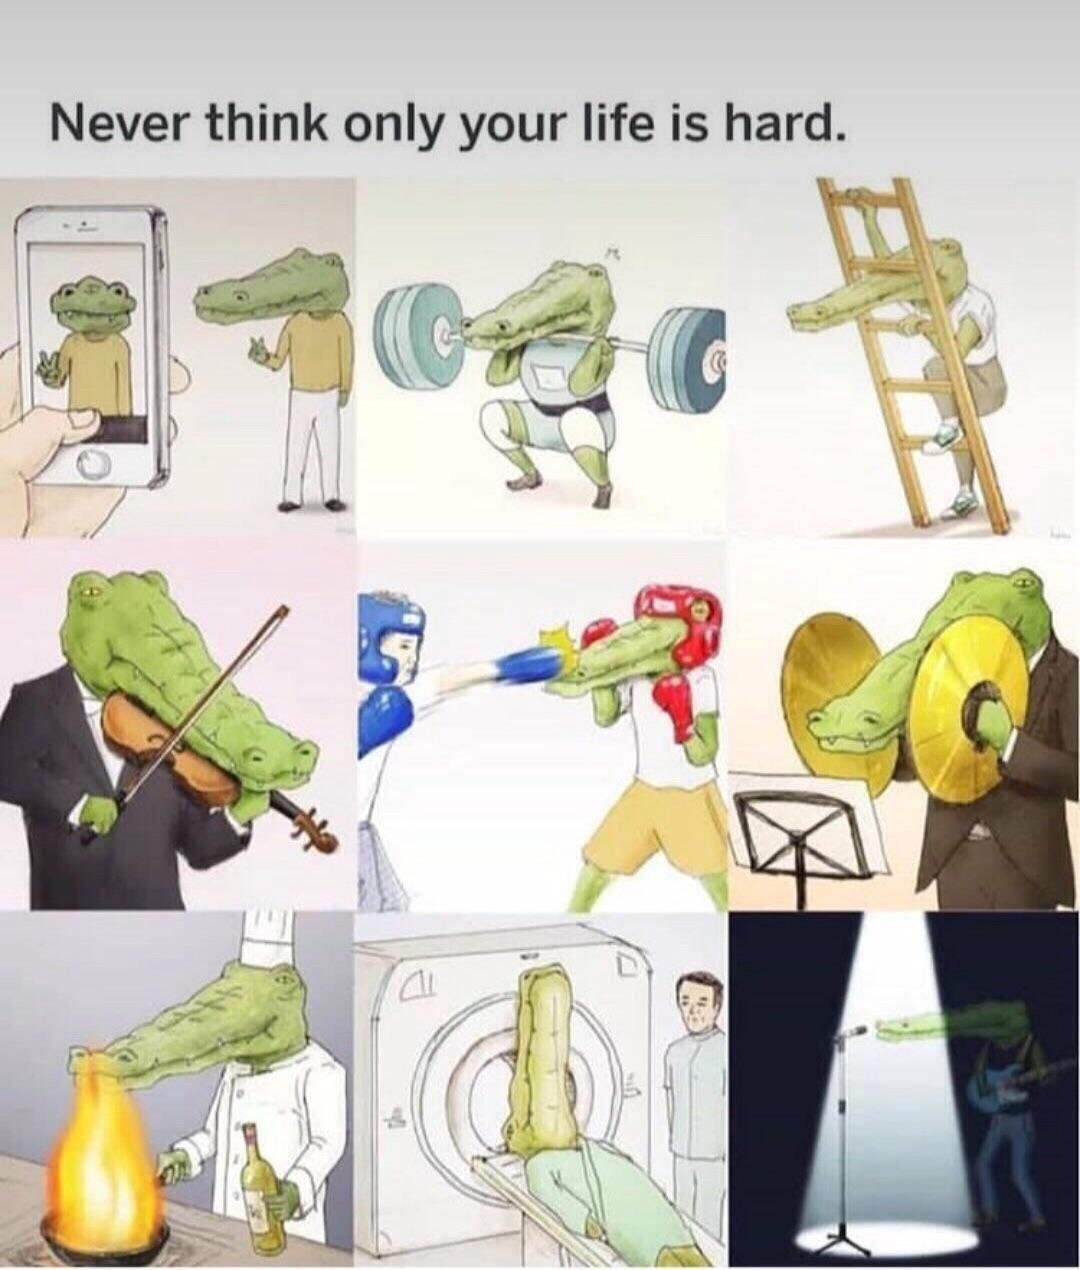 meme - crocodile life - Never think only your life is hard.